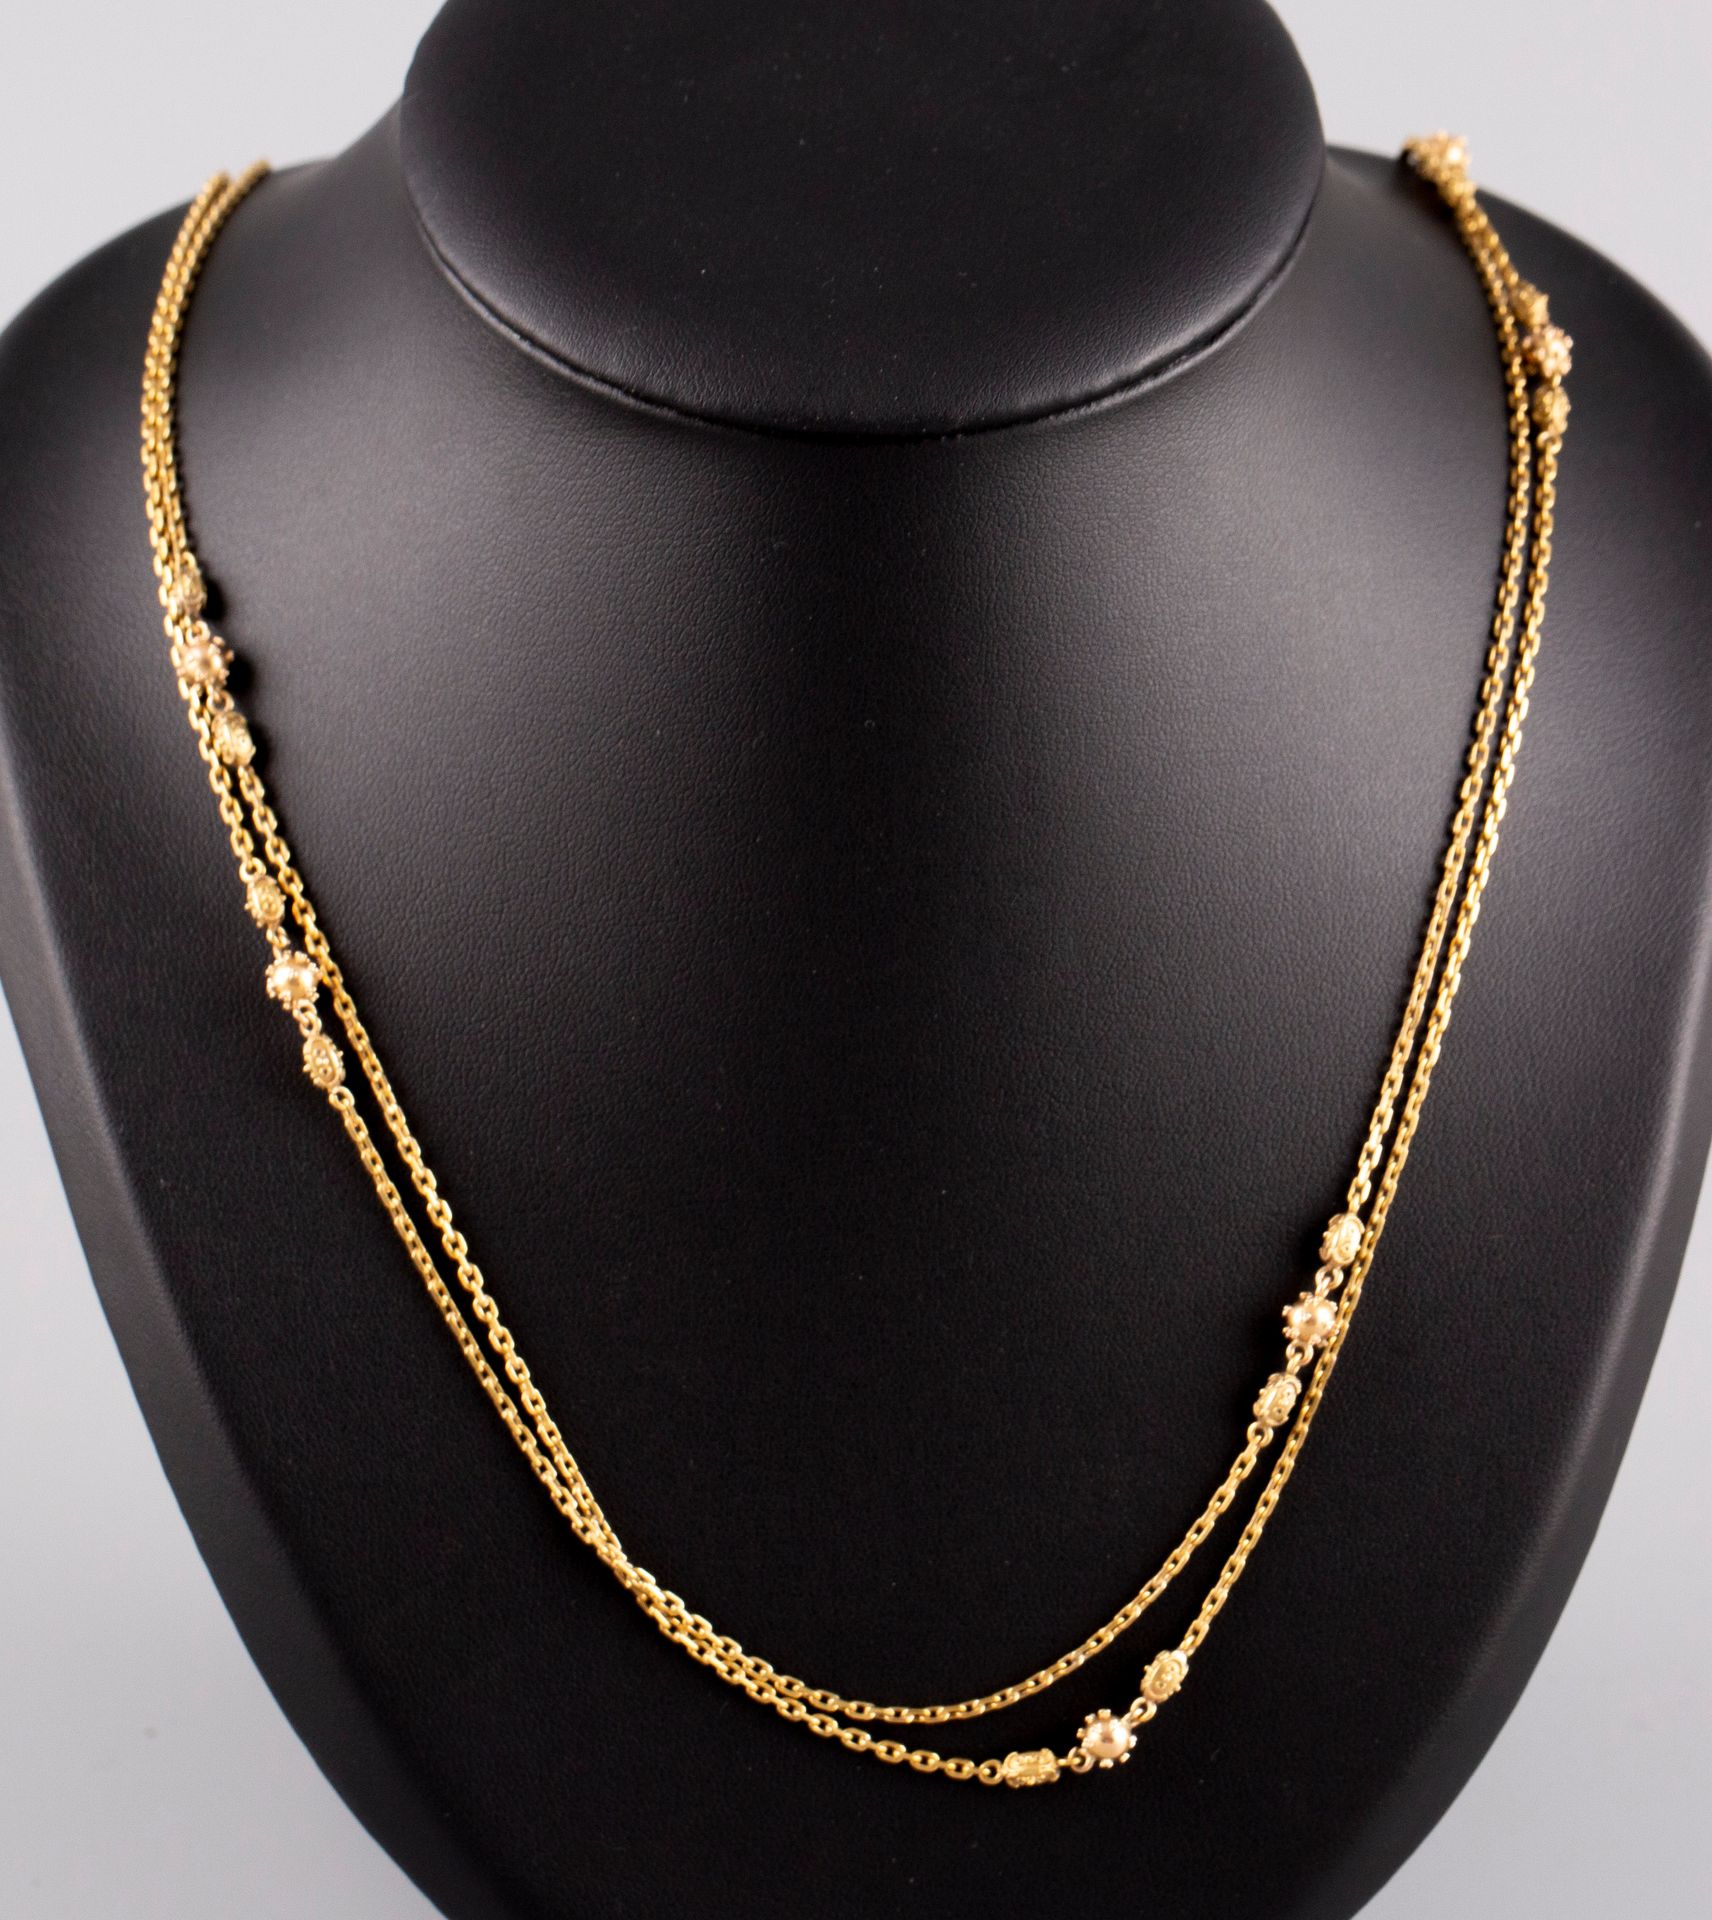 Null Long necklace in 18K yellow gold 750°. Weight: 23,2g